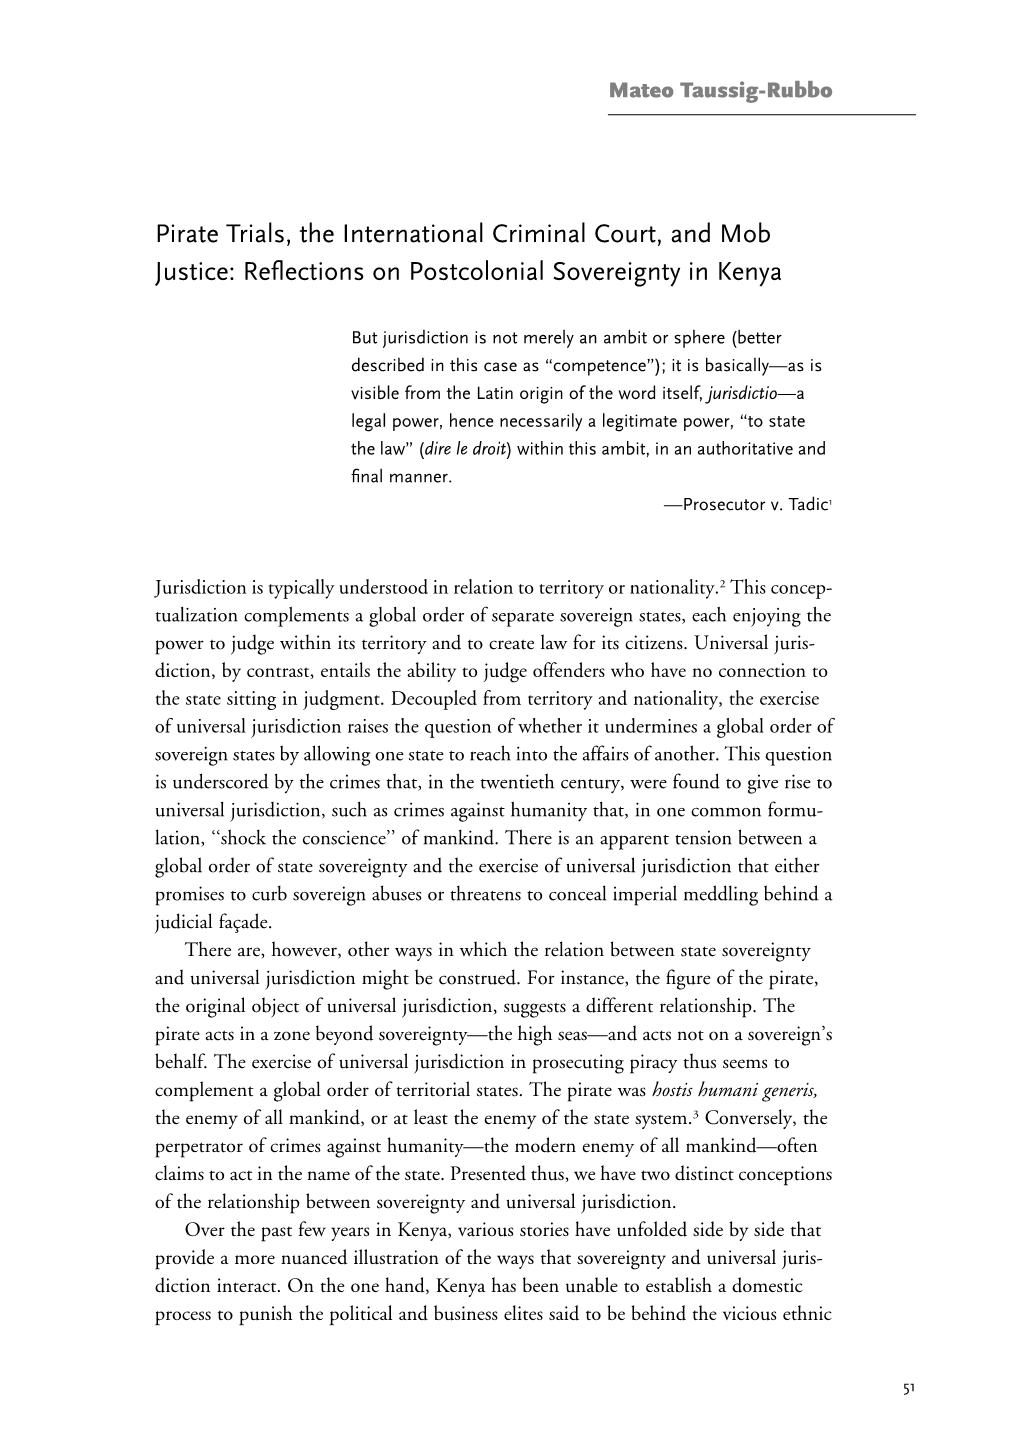 Pirate Trials, the International Criminal Court, and Mob Justice: Reﬂections on Postcolonial Sovereignty in Kenya